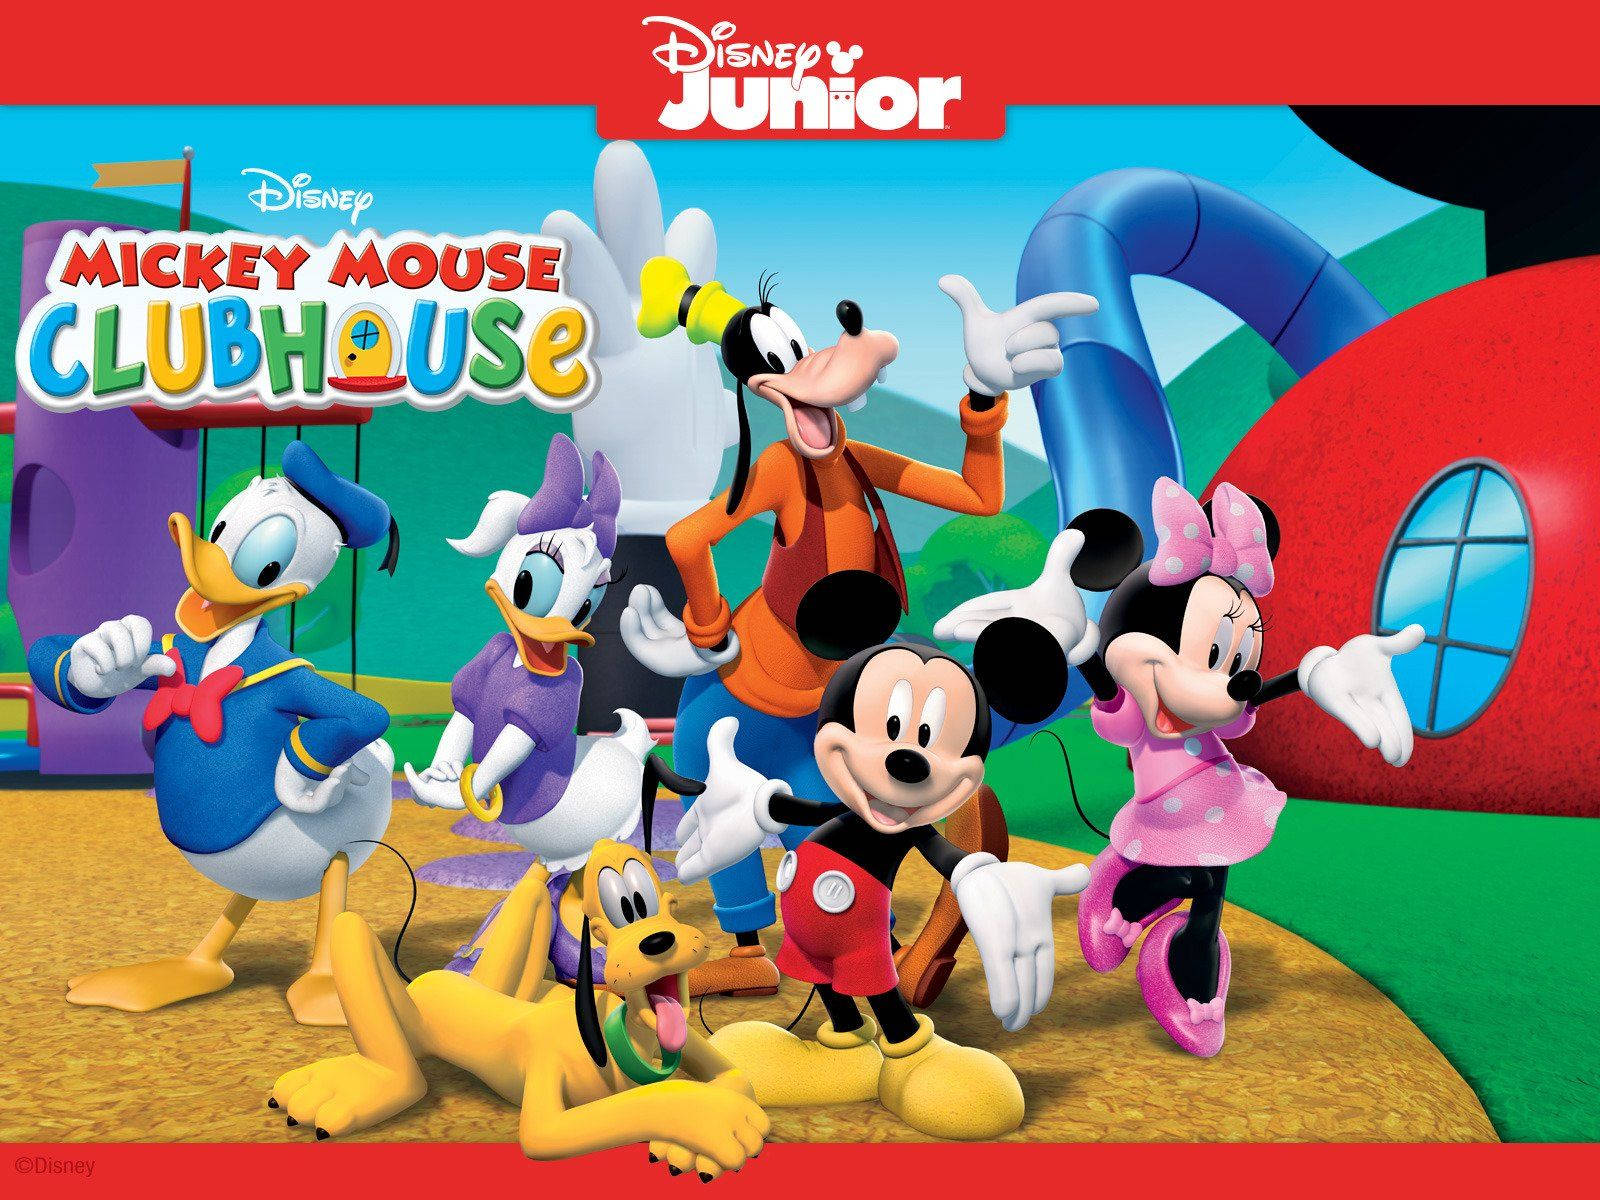 Mickey Mouse Clubhouse Disney Junior Poster Background